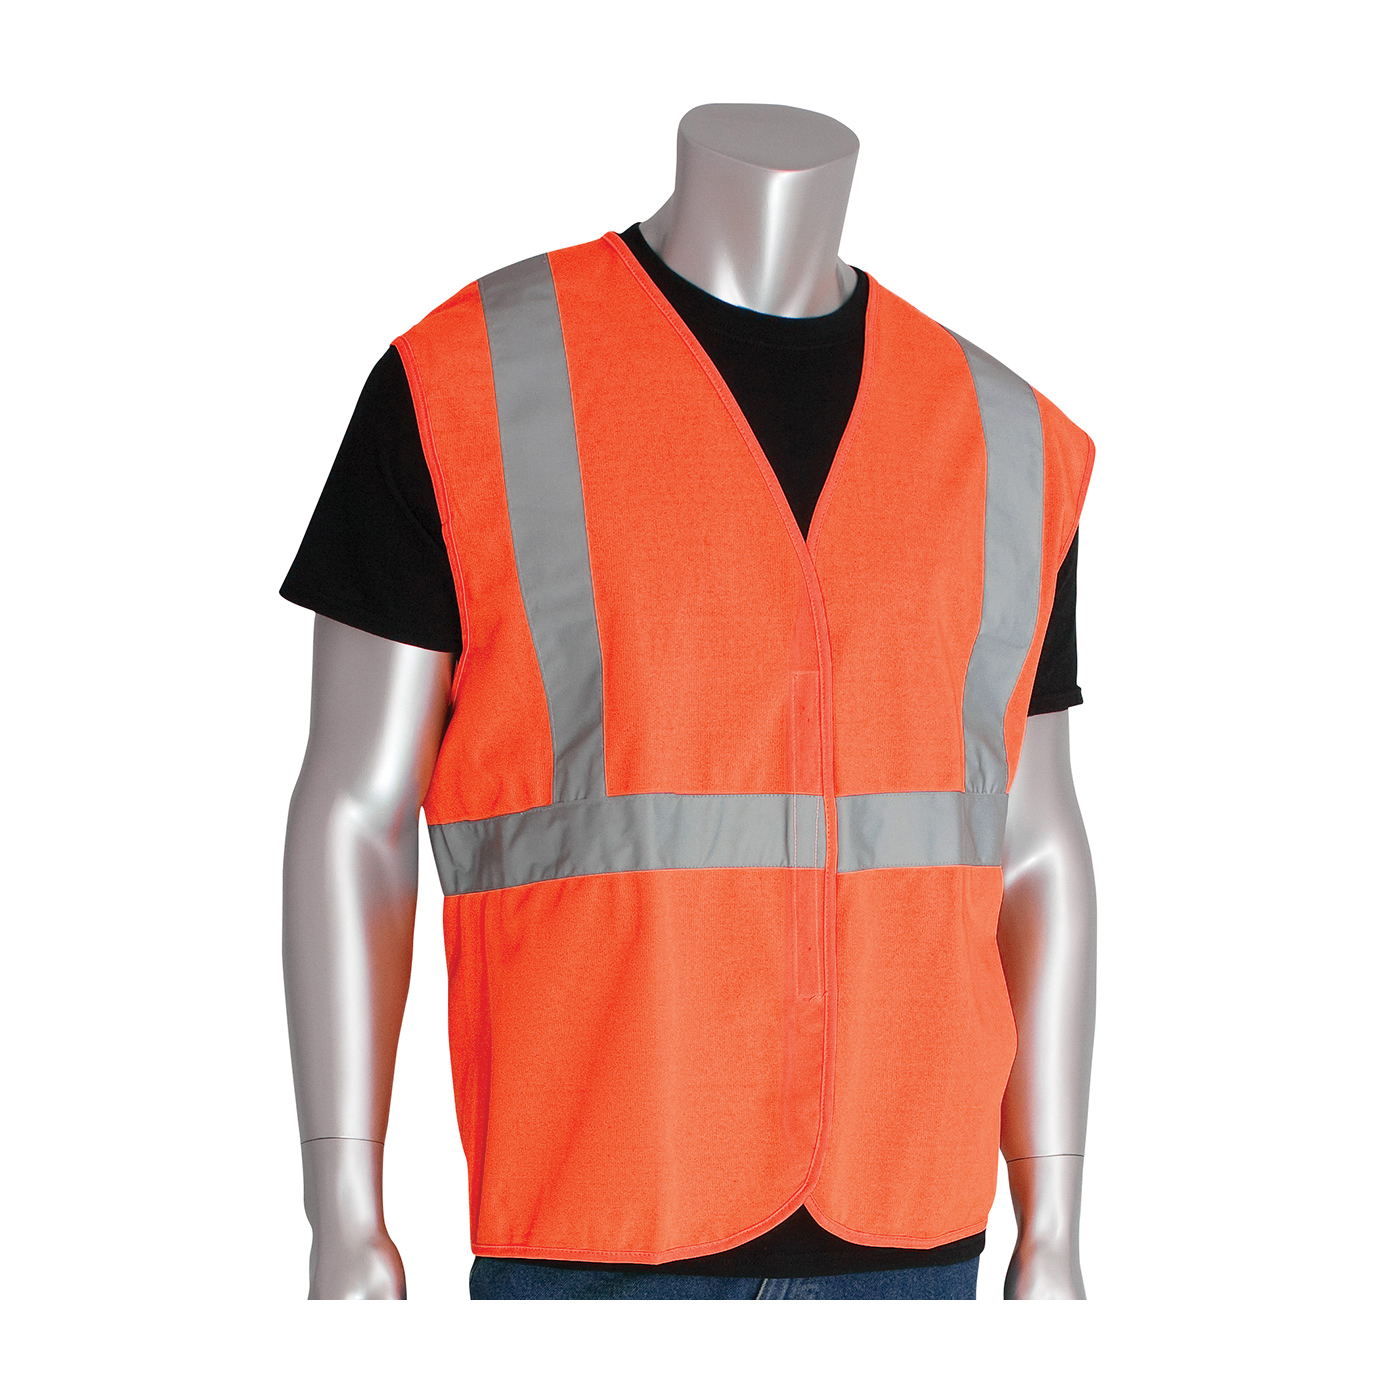 PIP® 302-WCENGOR-L Solid Vest, L, Hi-Viz Orange, Polyester, Hook and Loop Closure, ANSI Class: Class 2, Specifications Met: ANSI 107 Type R